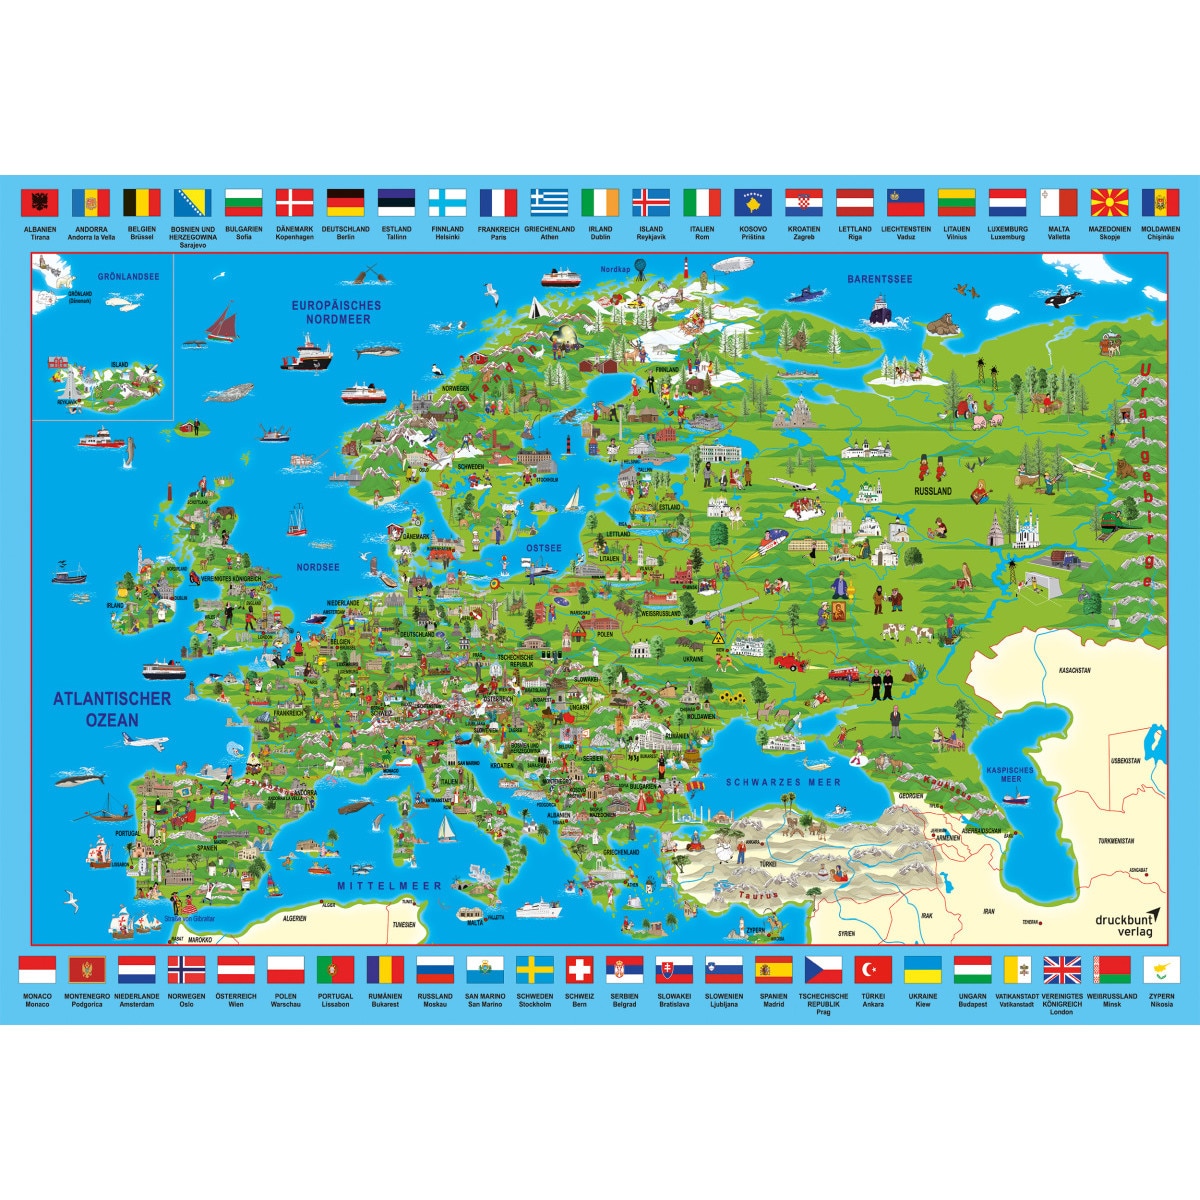 Puzzle 500 piese - Discover Europe | Schmidt